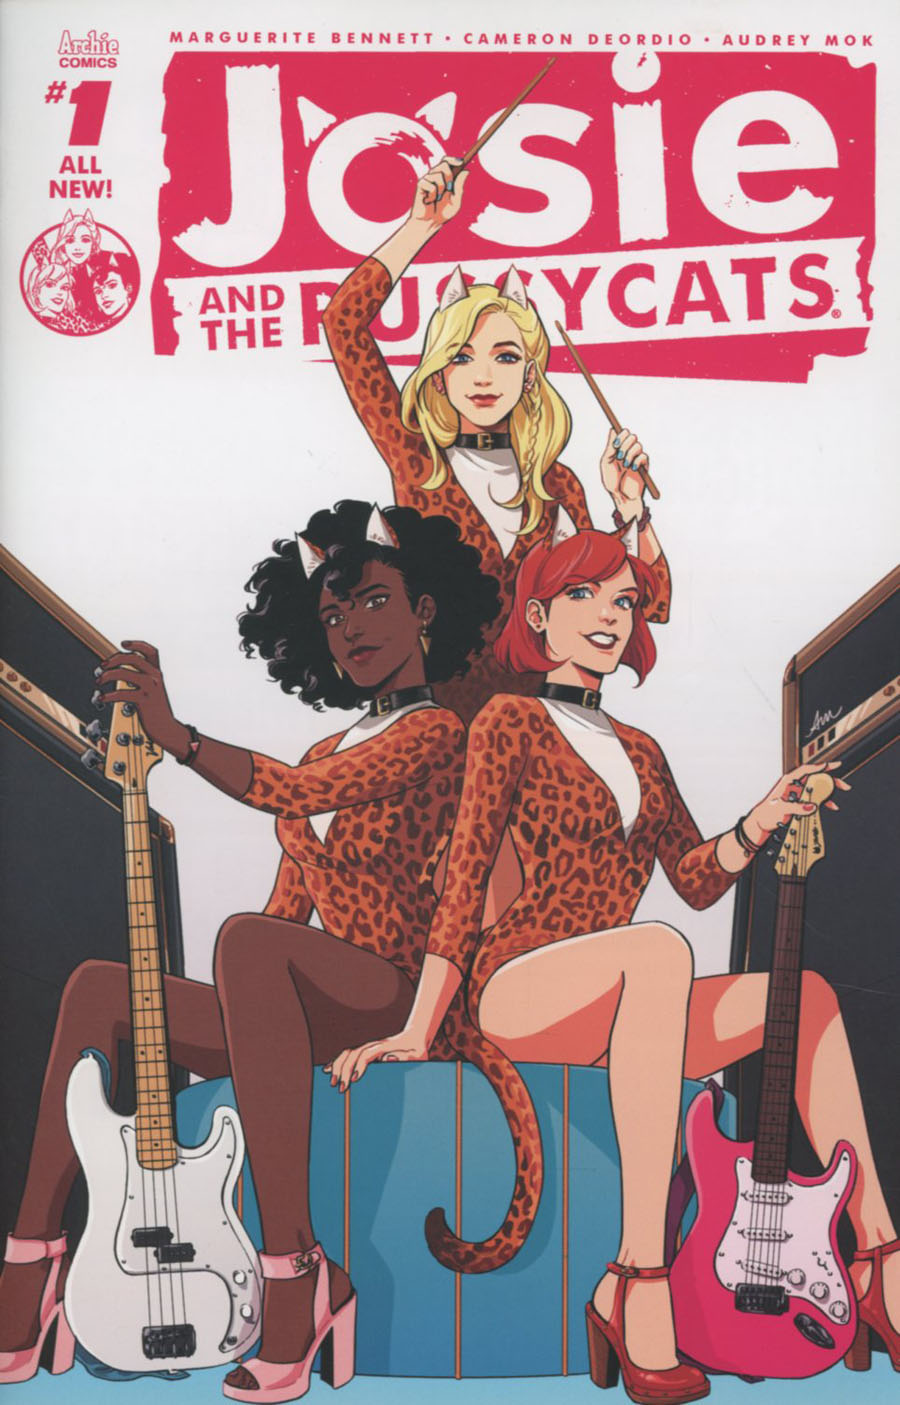 Josie And The Pussycats Vol 2 #1 Cover A Regular Audrey Mok Cover